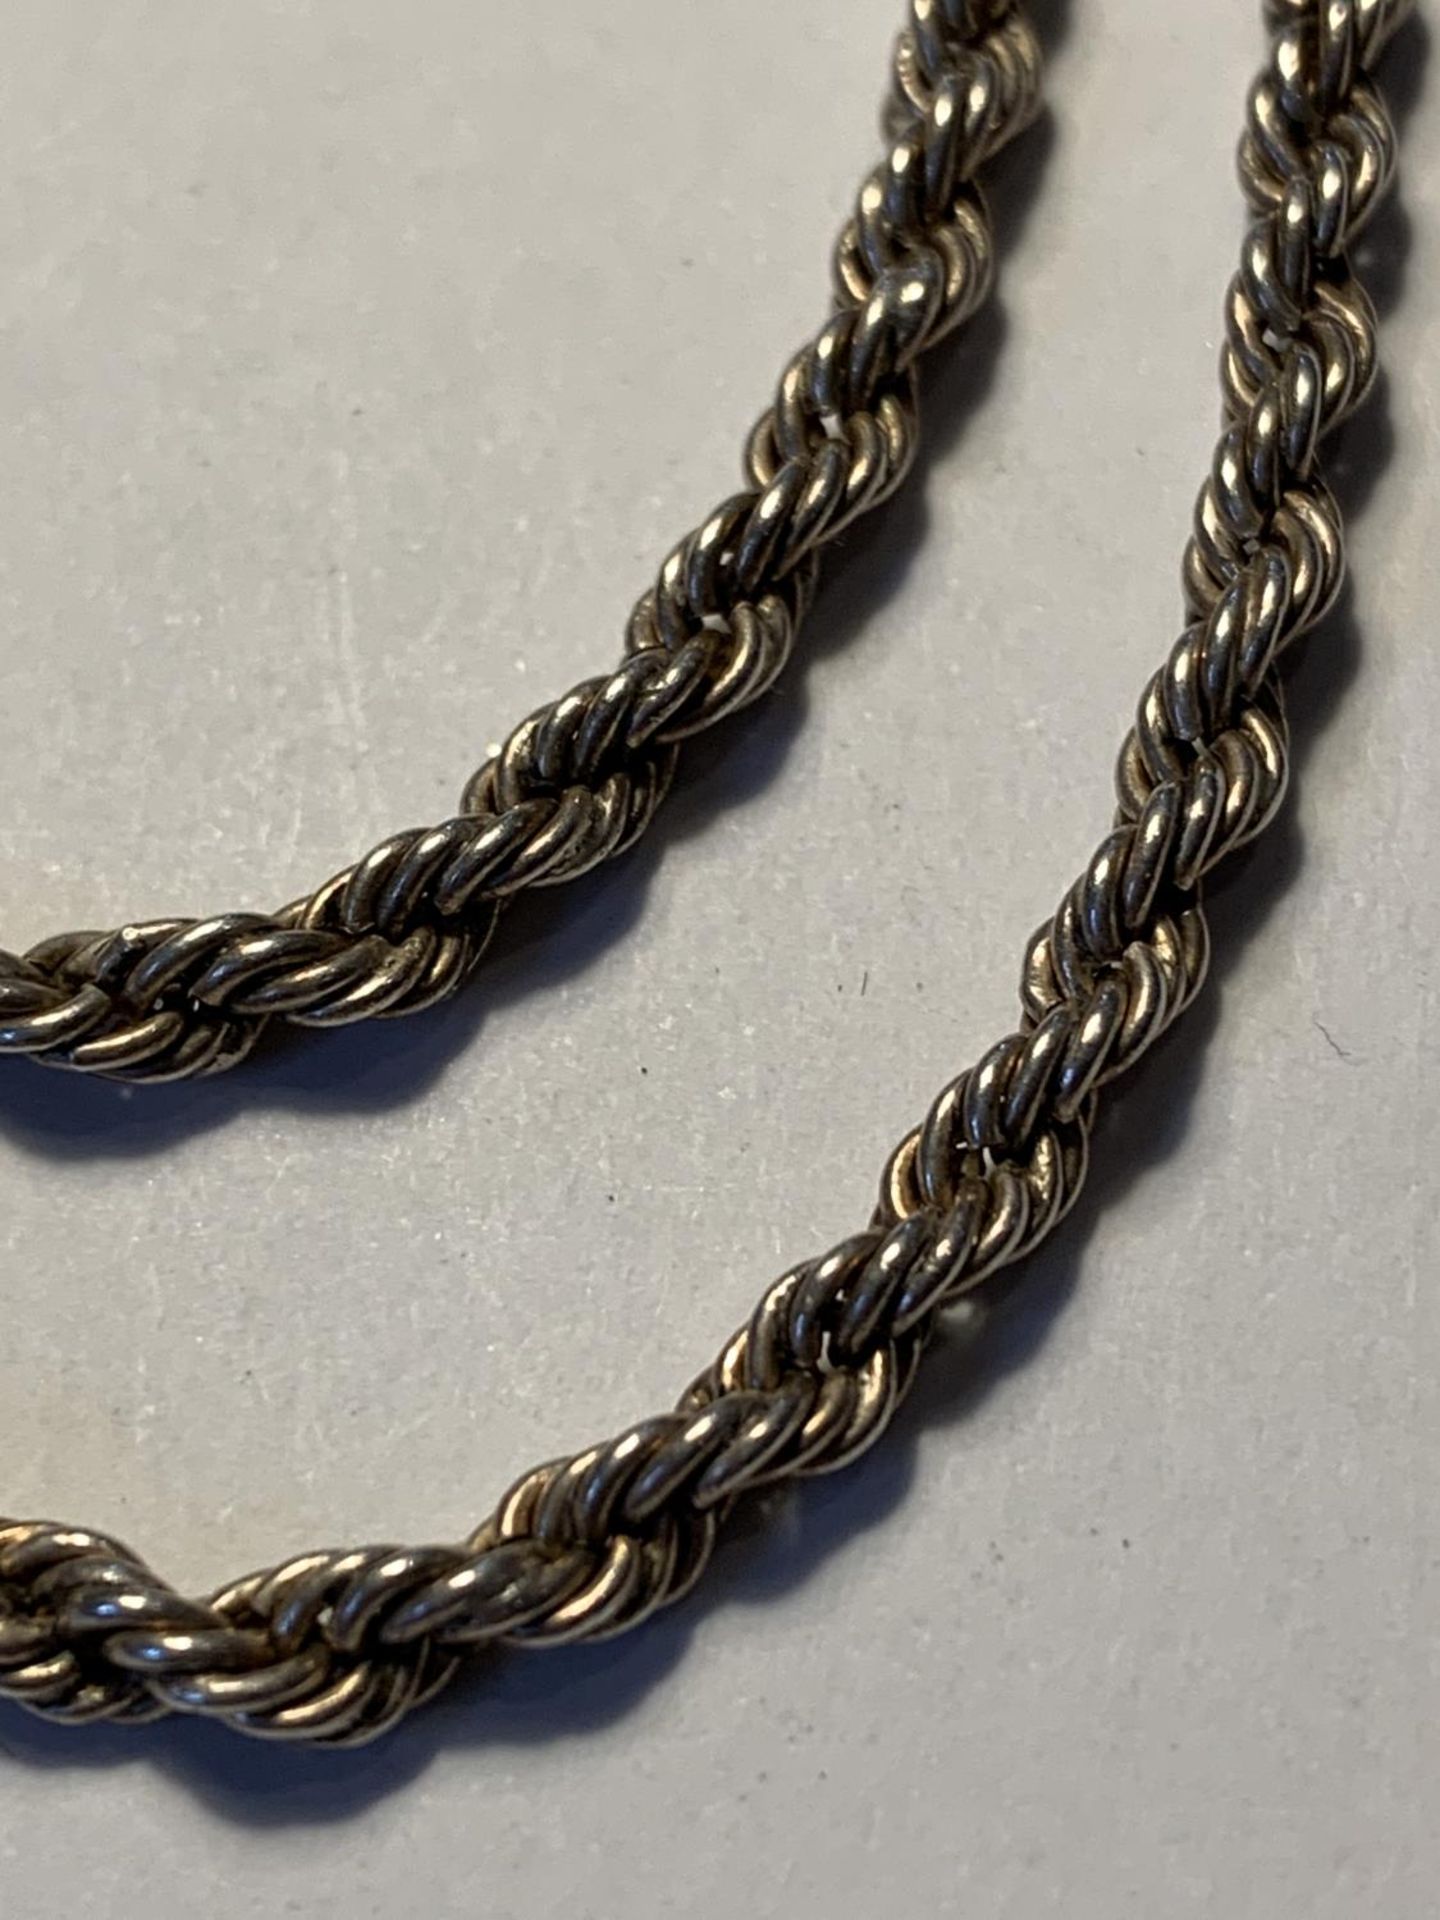 A SILVER ROPE CHAIN NECKLACE LENGTH 24" - Image 2 of 3